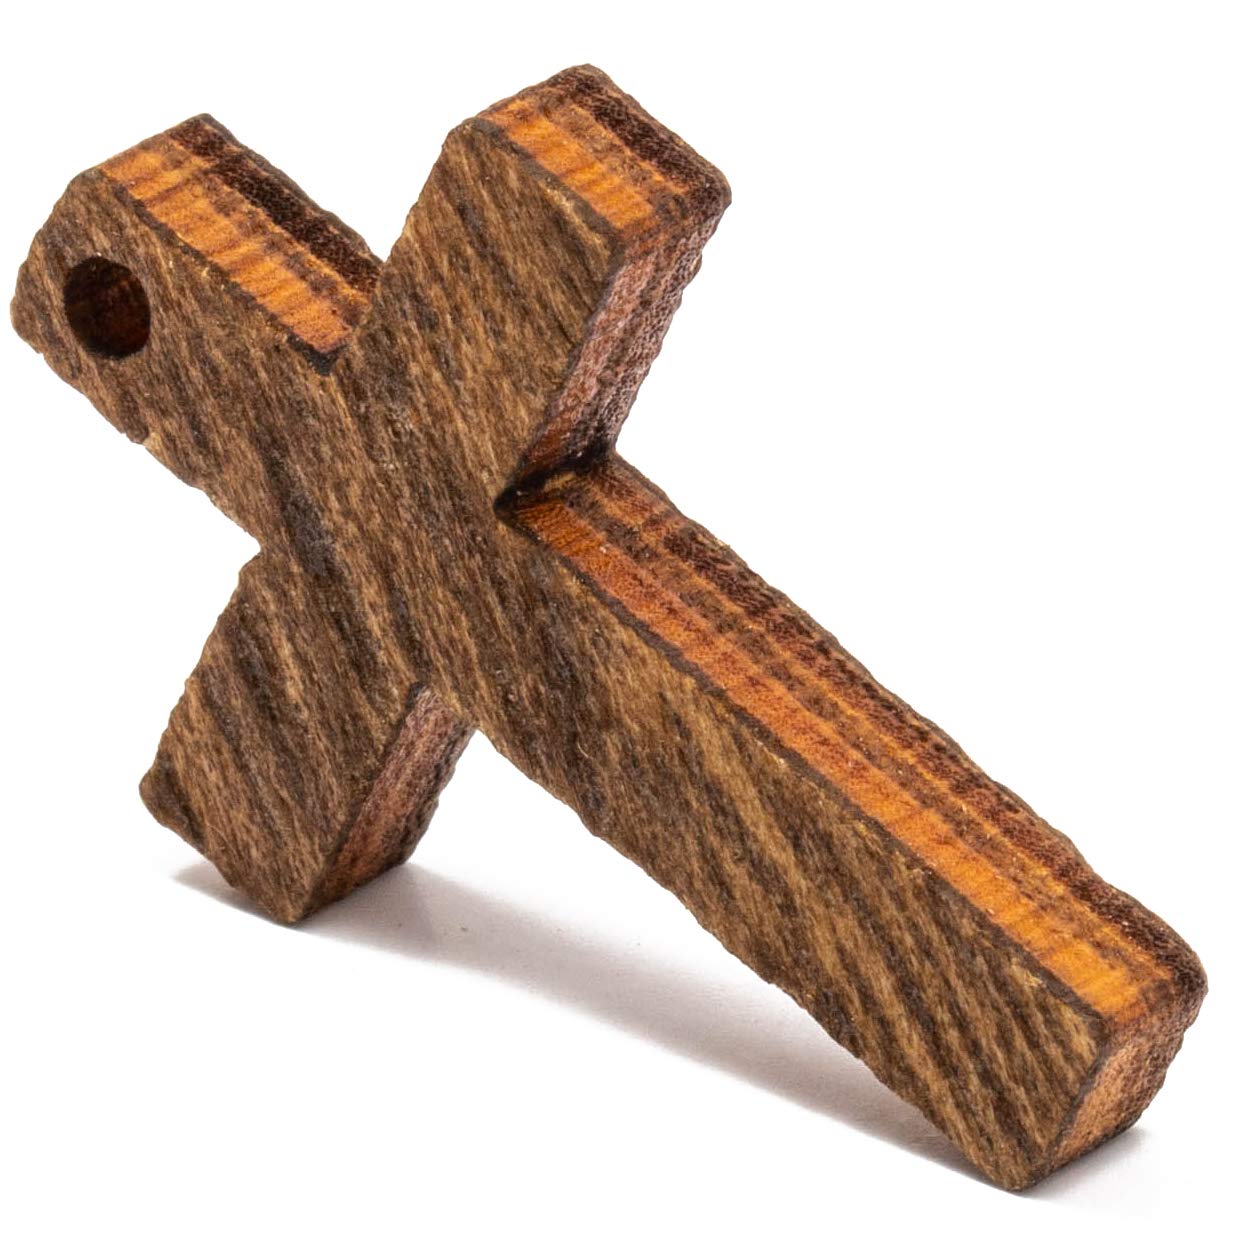 Small Wooden Crosses